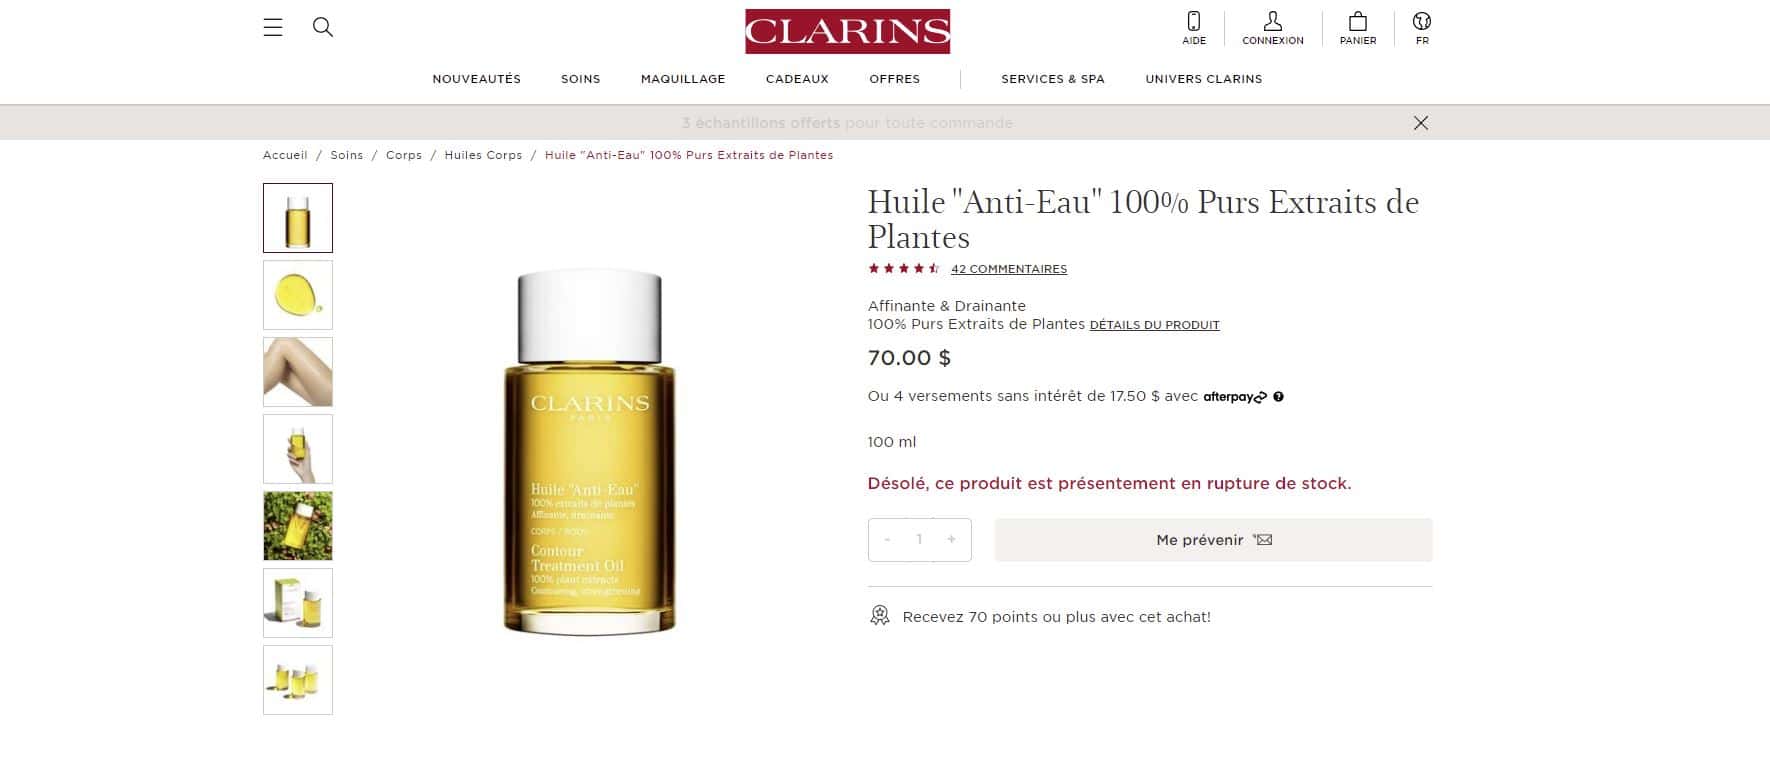 clarins-reviews